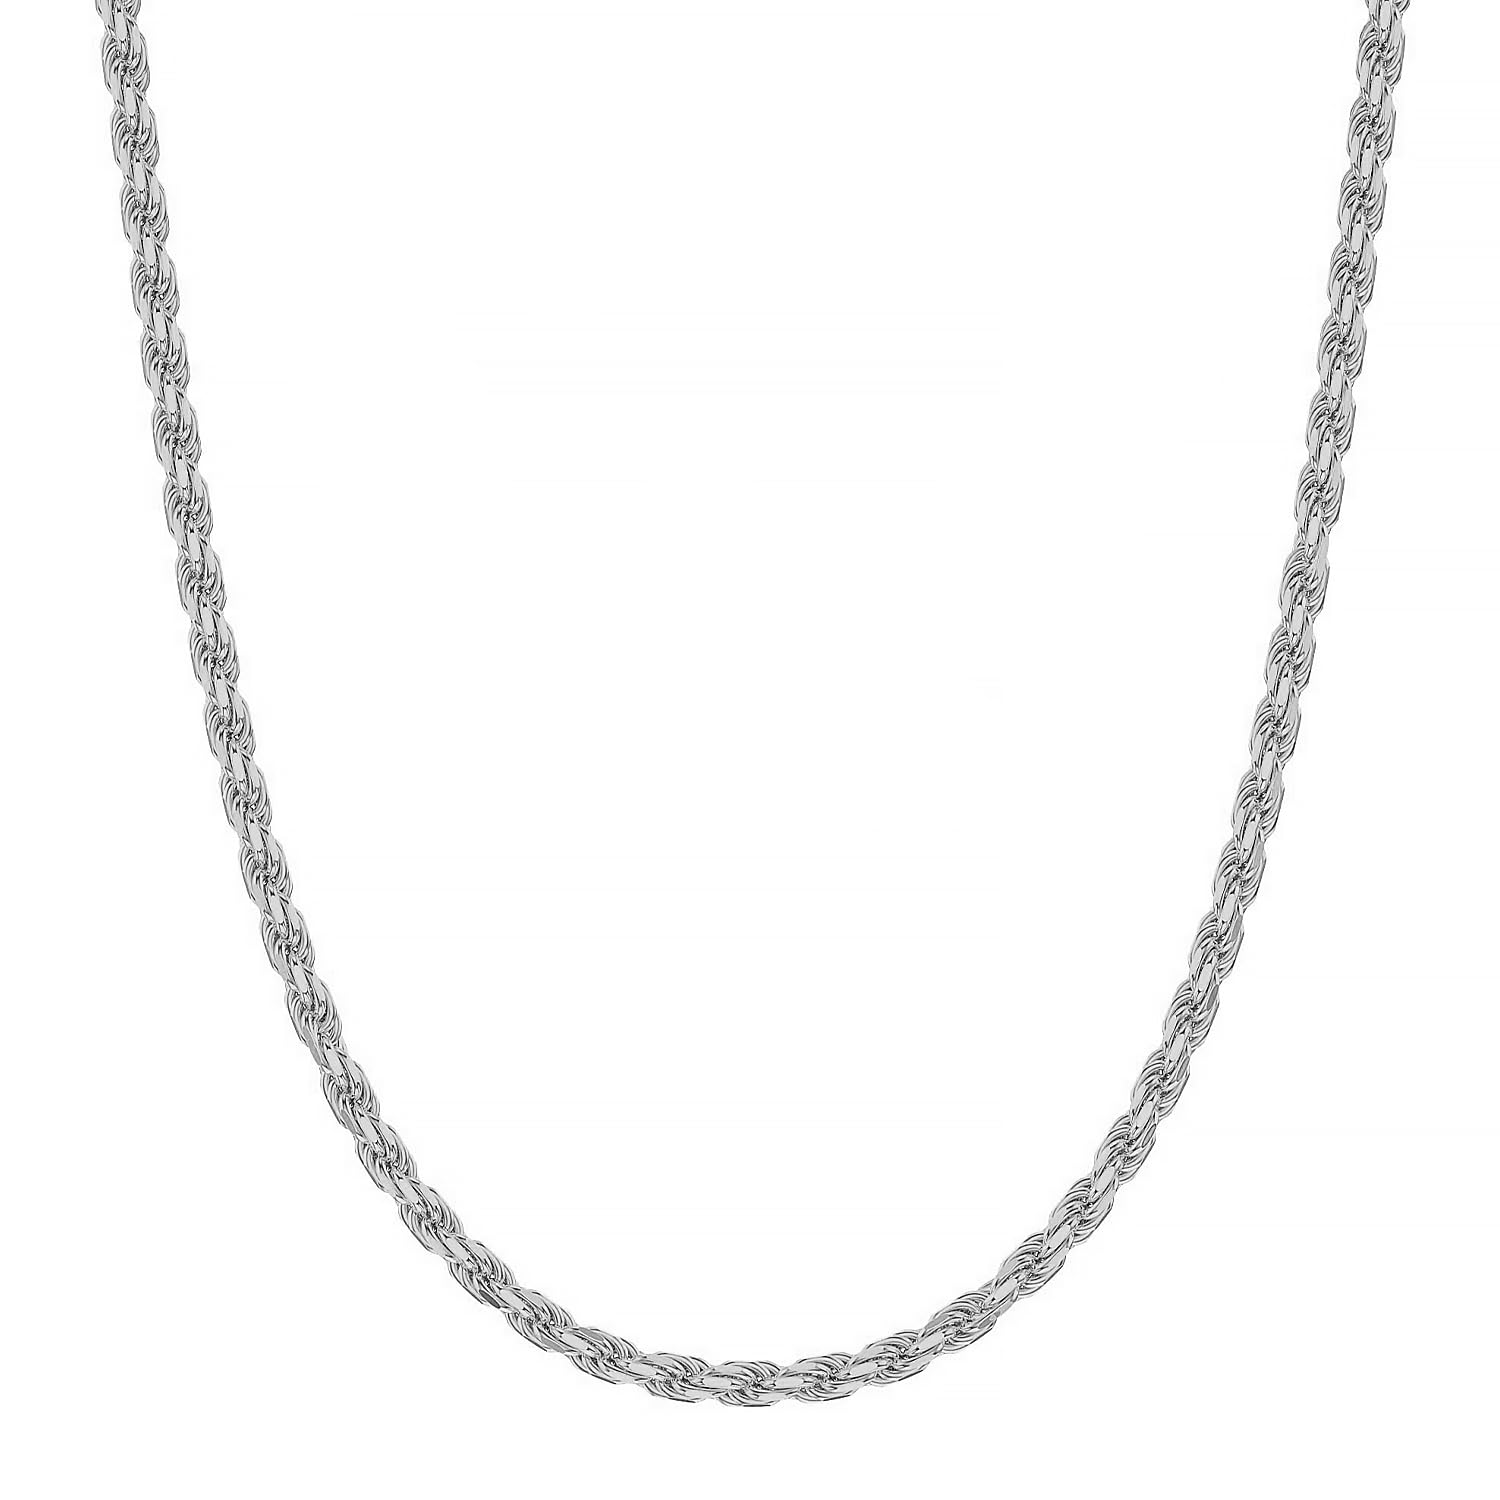 925 Sterling Silver Italian Diamond-Cut Twisted Braided Rope Chain Necklace for Women 3 MM